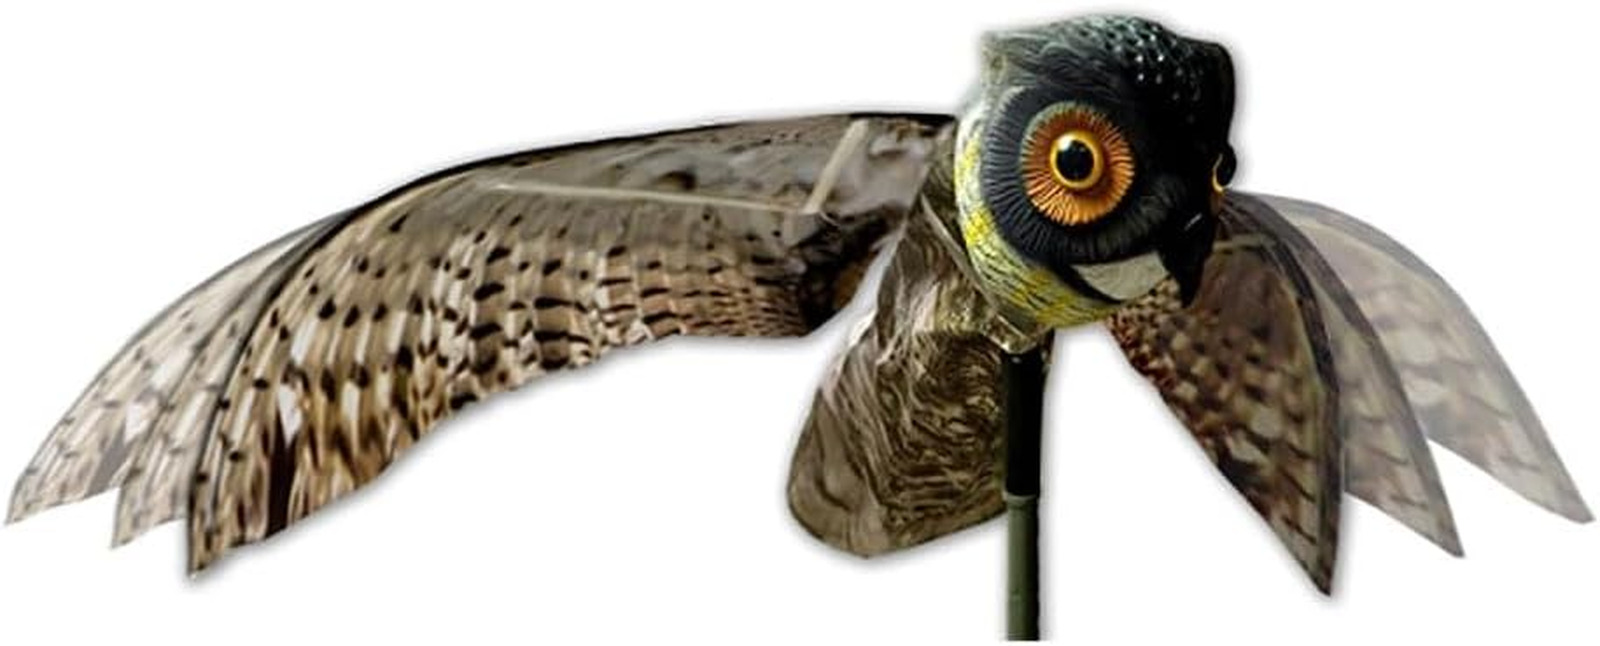 Prowler Owl, Lifelike Owl Decoy with Glassy Eyes and Moving Wings, Easy to Insta